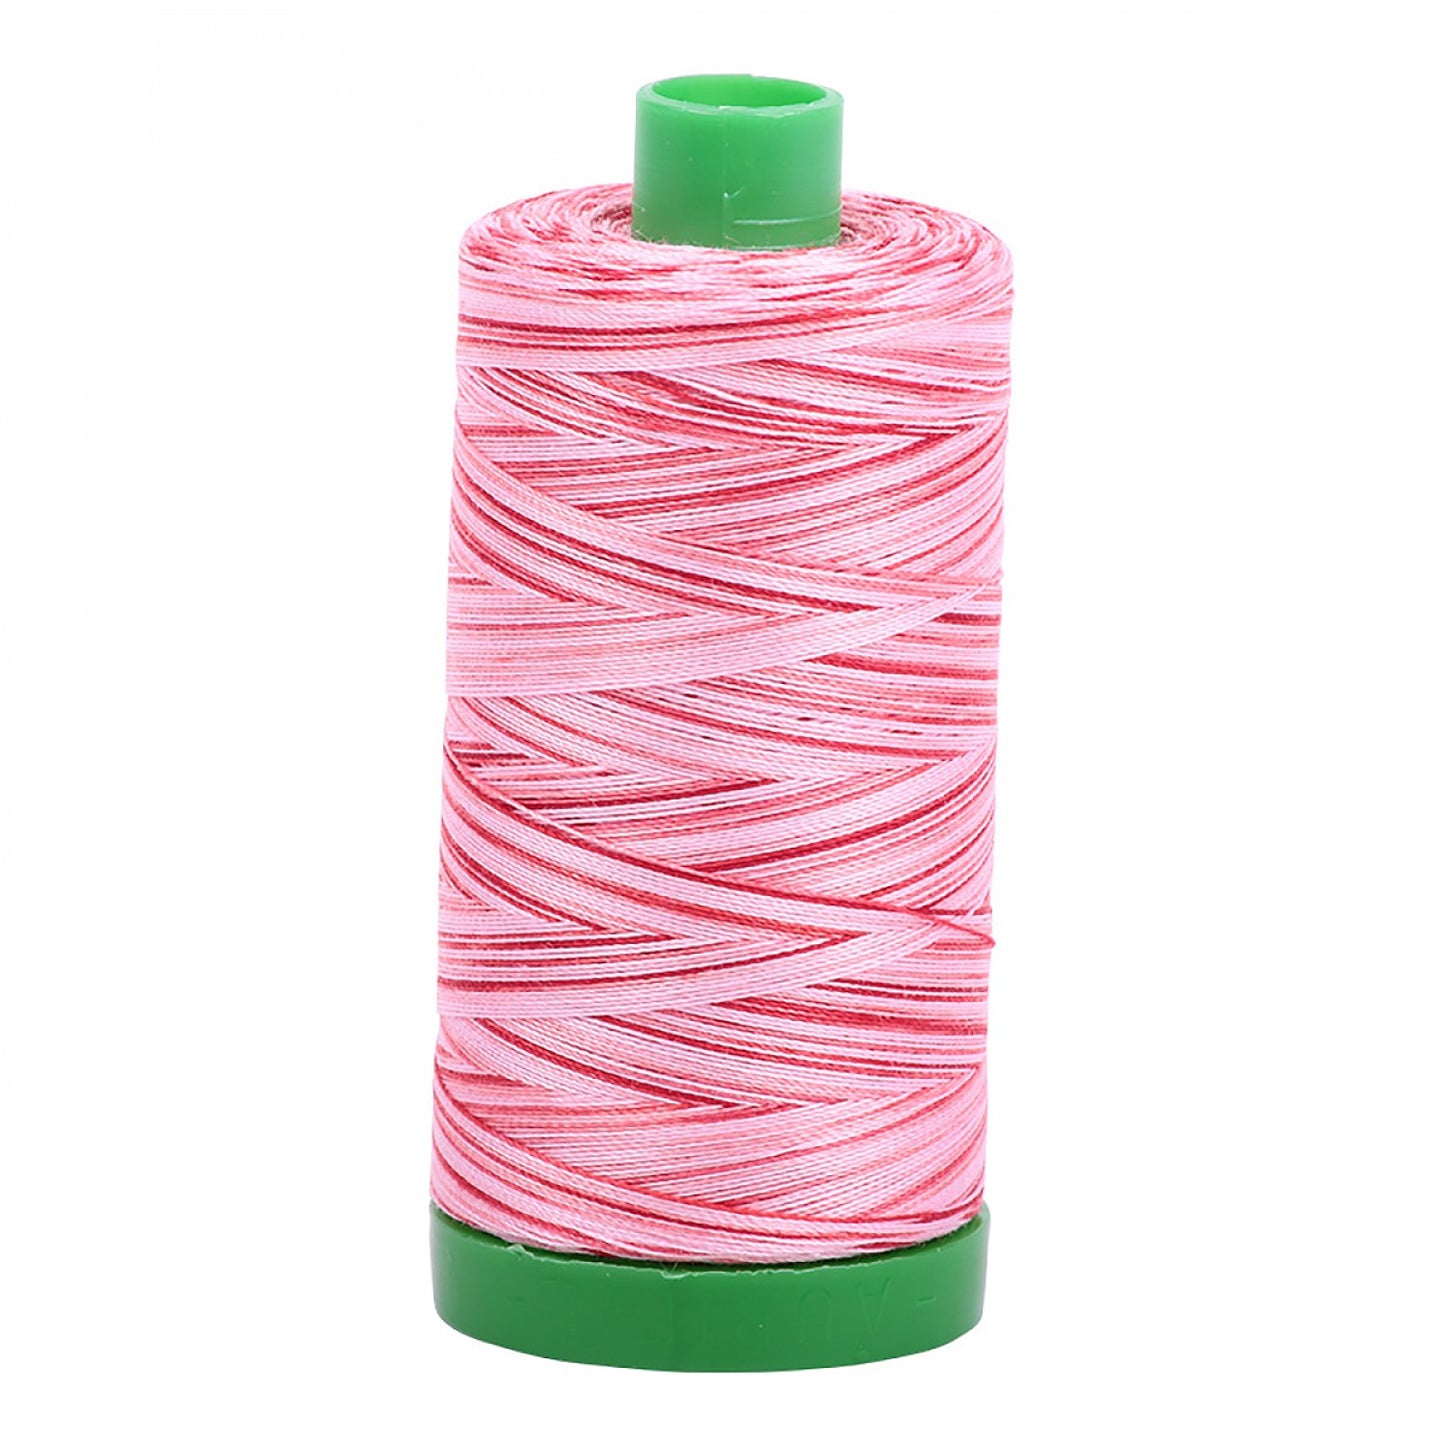 A1140-4668 Mako Cotton Embroidery Thread 40wt 1094yds Variegated Pink & Red